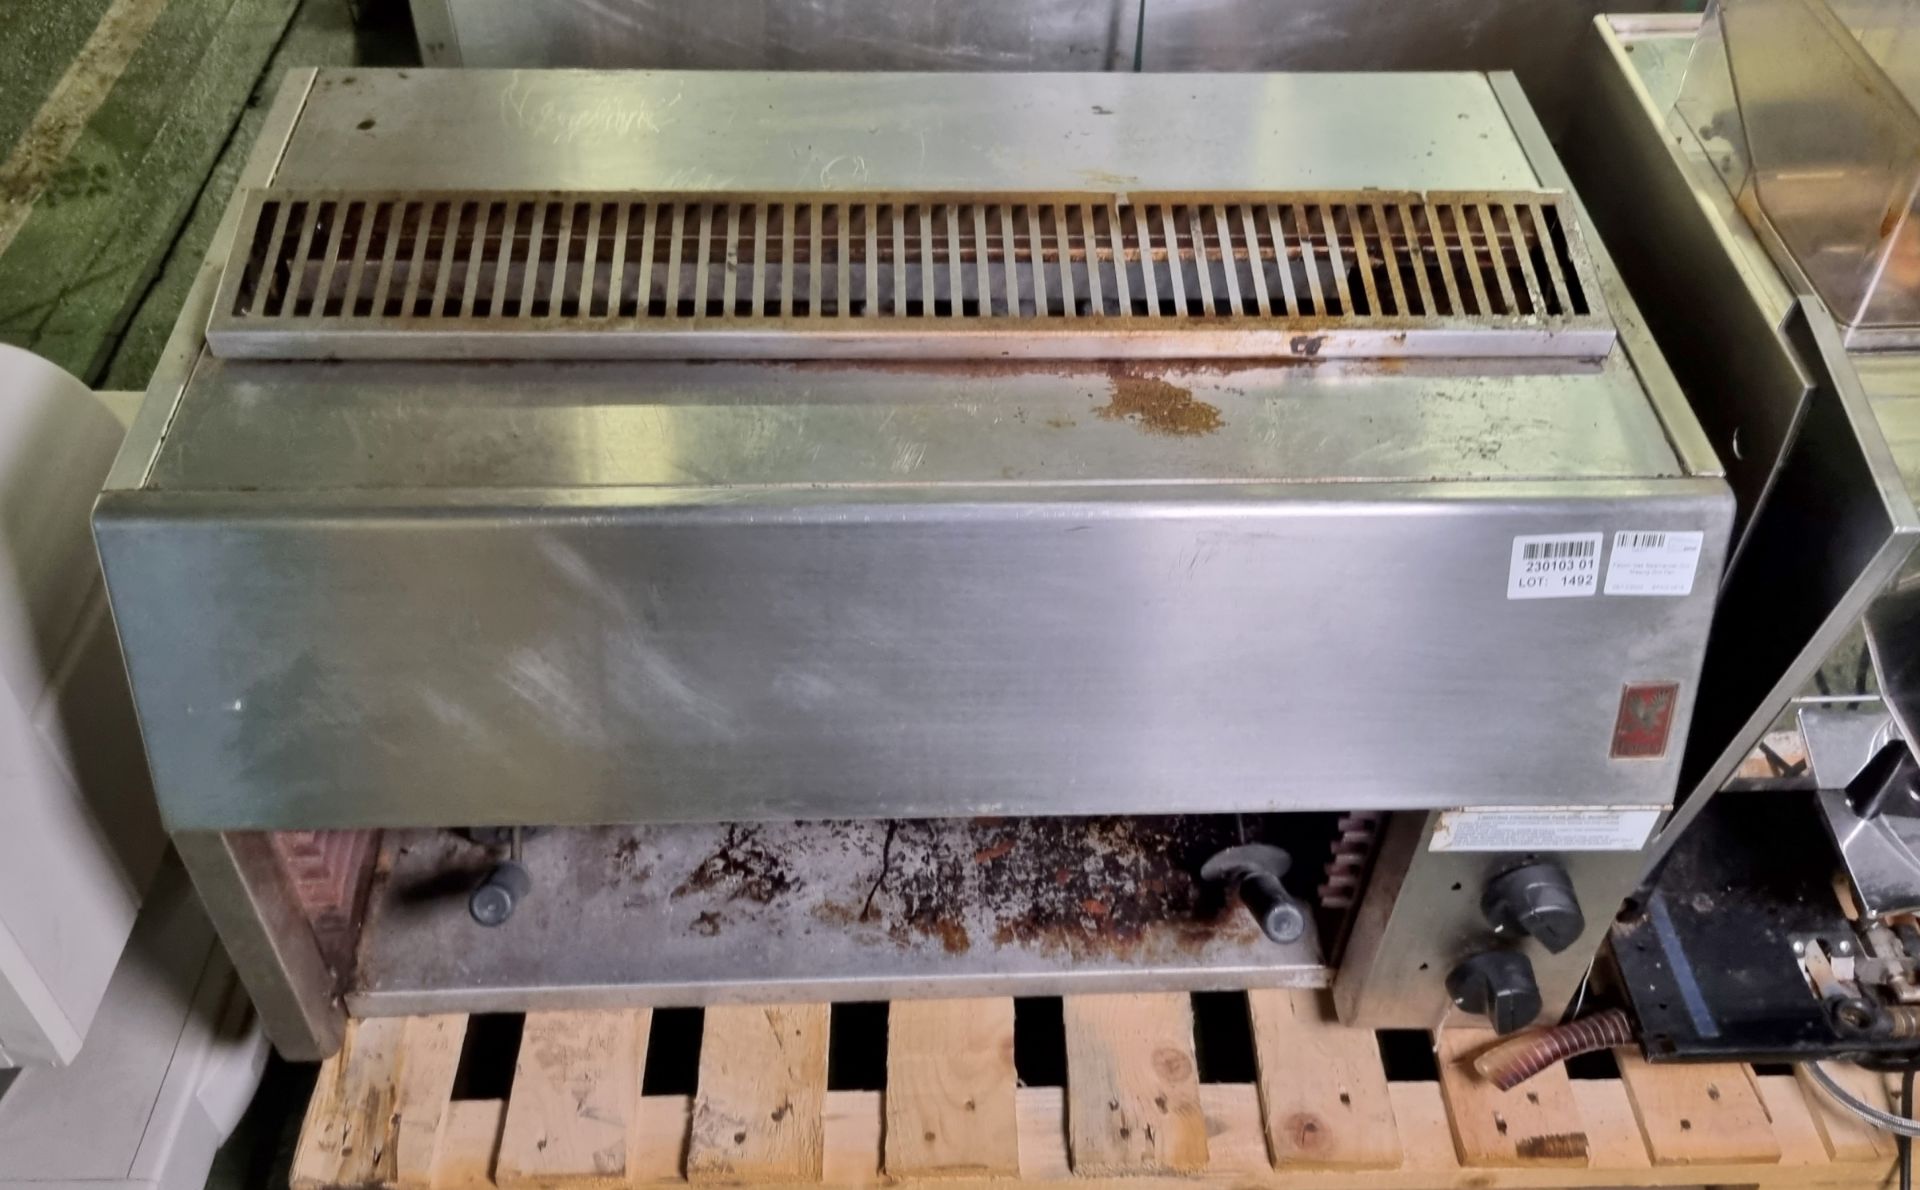 Falcon Gas Salamander Grill - Missing Grill Pan - Image 2 of 3